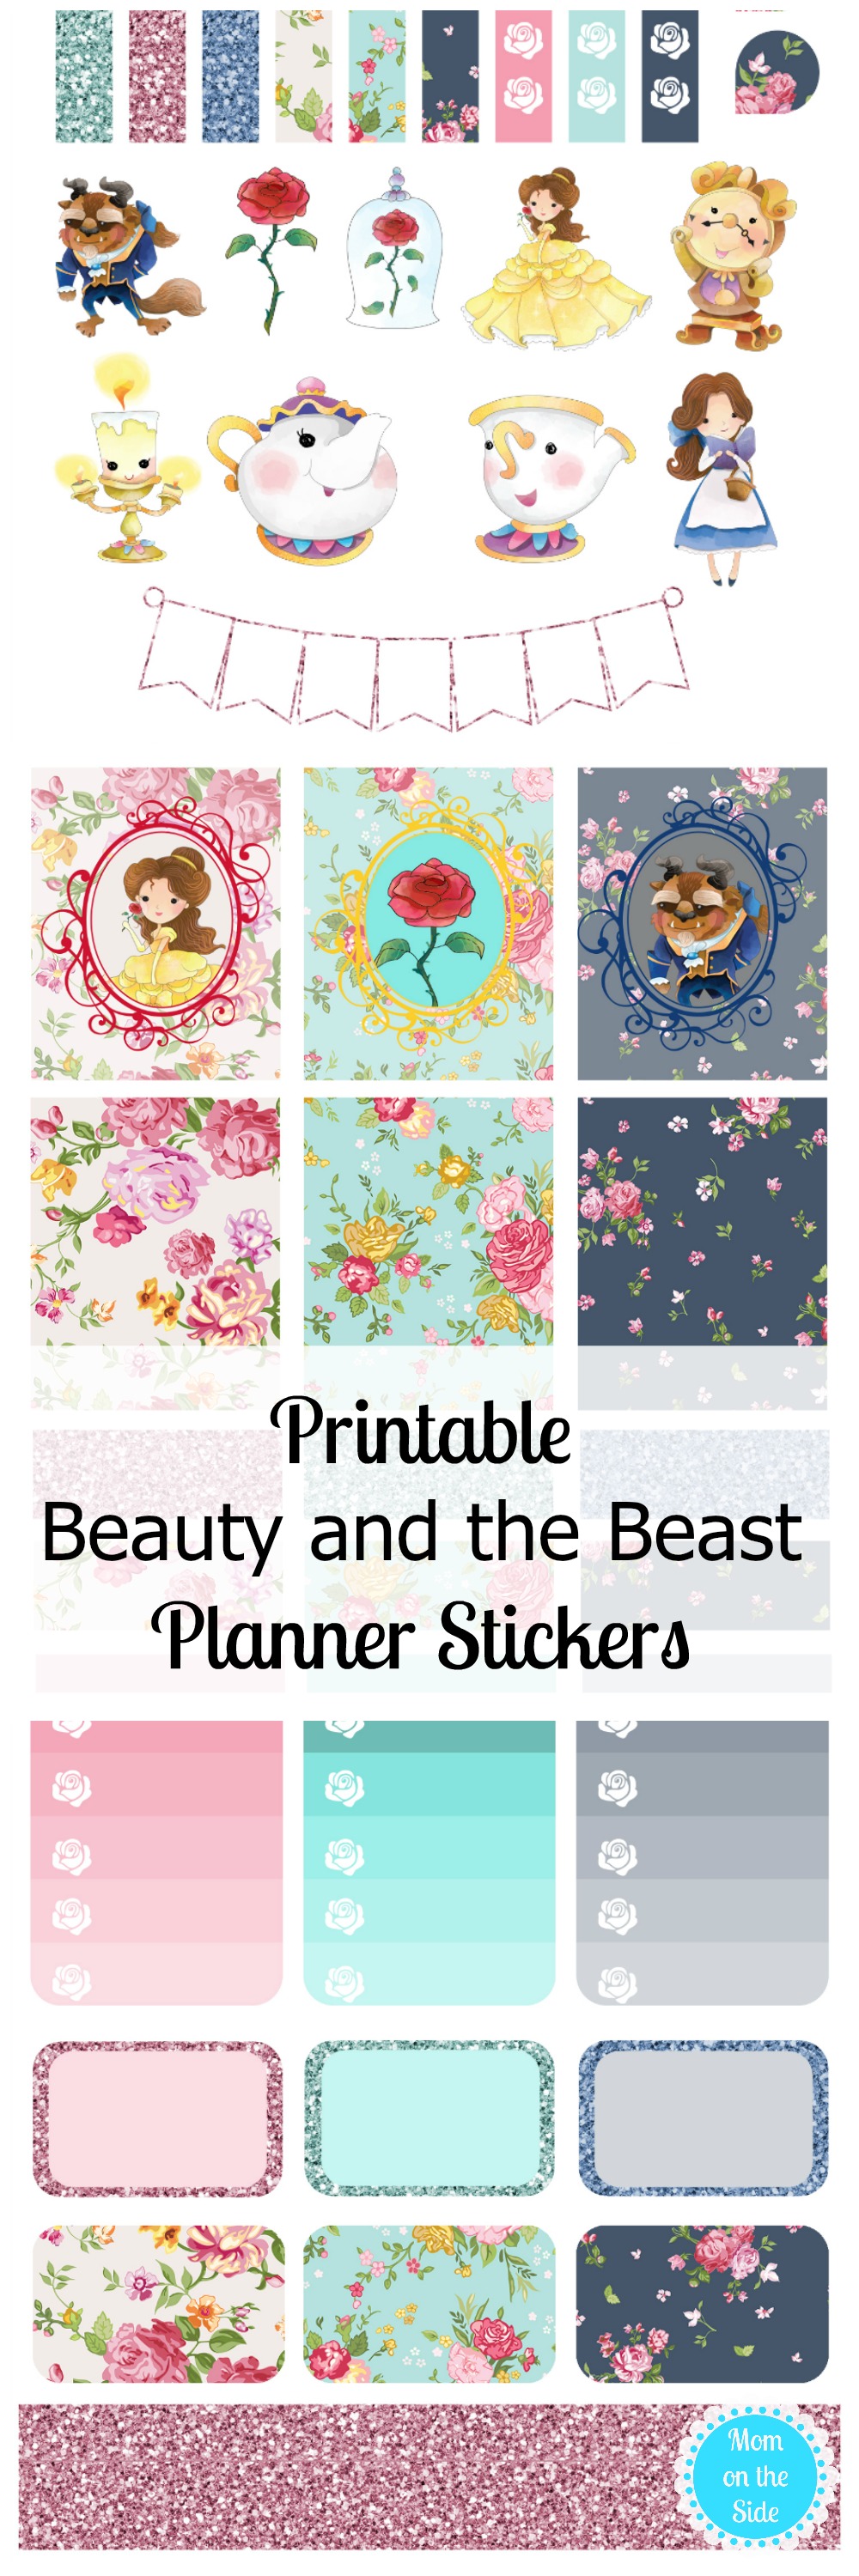 With Disney's Beauty and the Beast now in theaters, these printable Beauty and the Beast Planner Stickers are just the thing your planner needs!